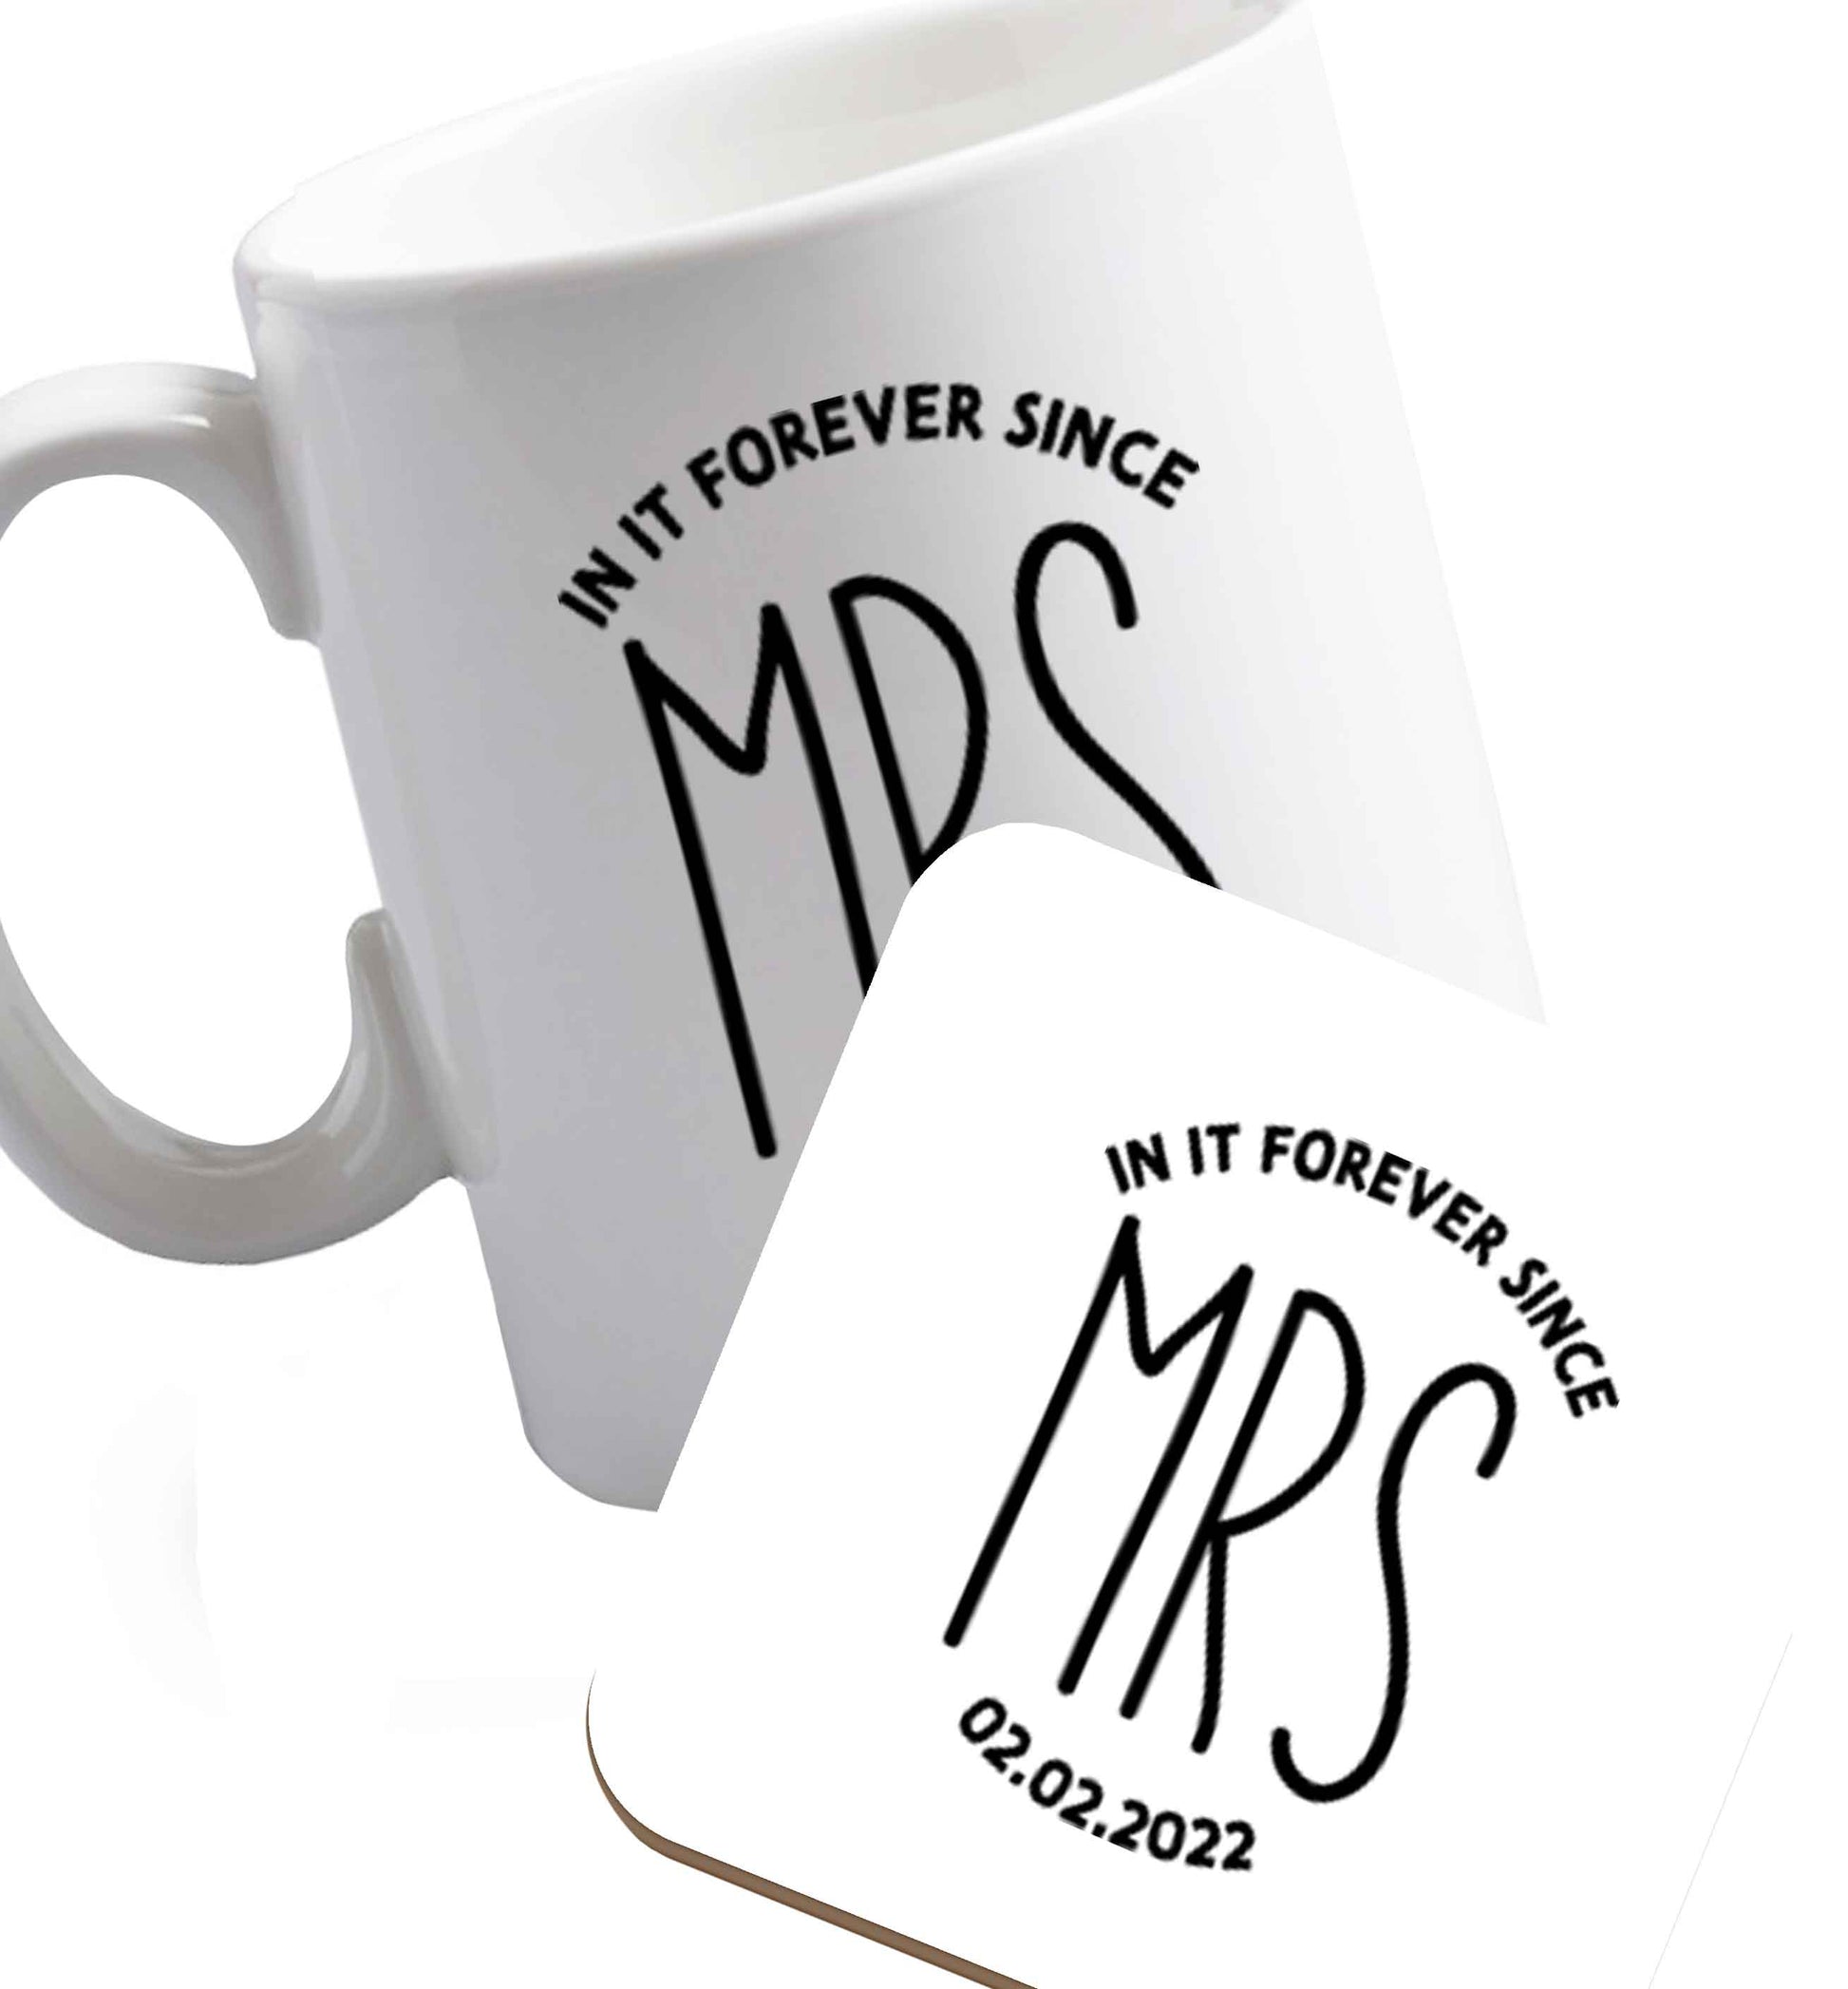 10 oz Funny matching gifts for him and her! Get matchy matchy, ideal for newlywed couples or a little valentines gift!   ceramic mug and coaster set right handed